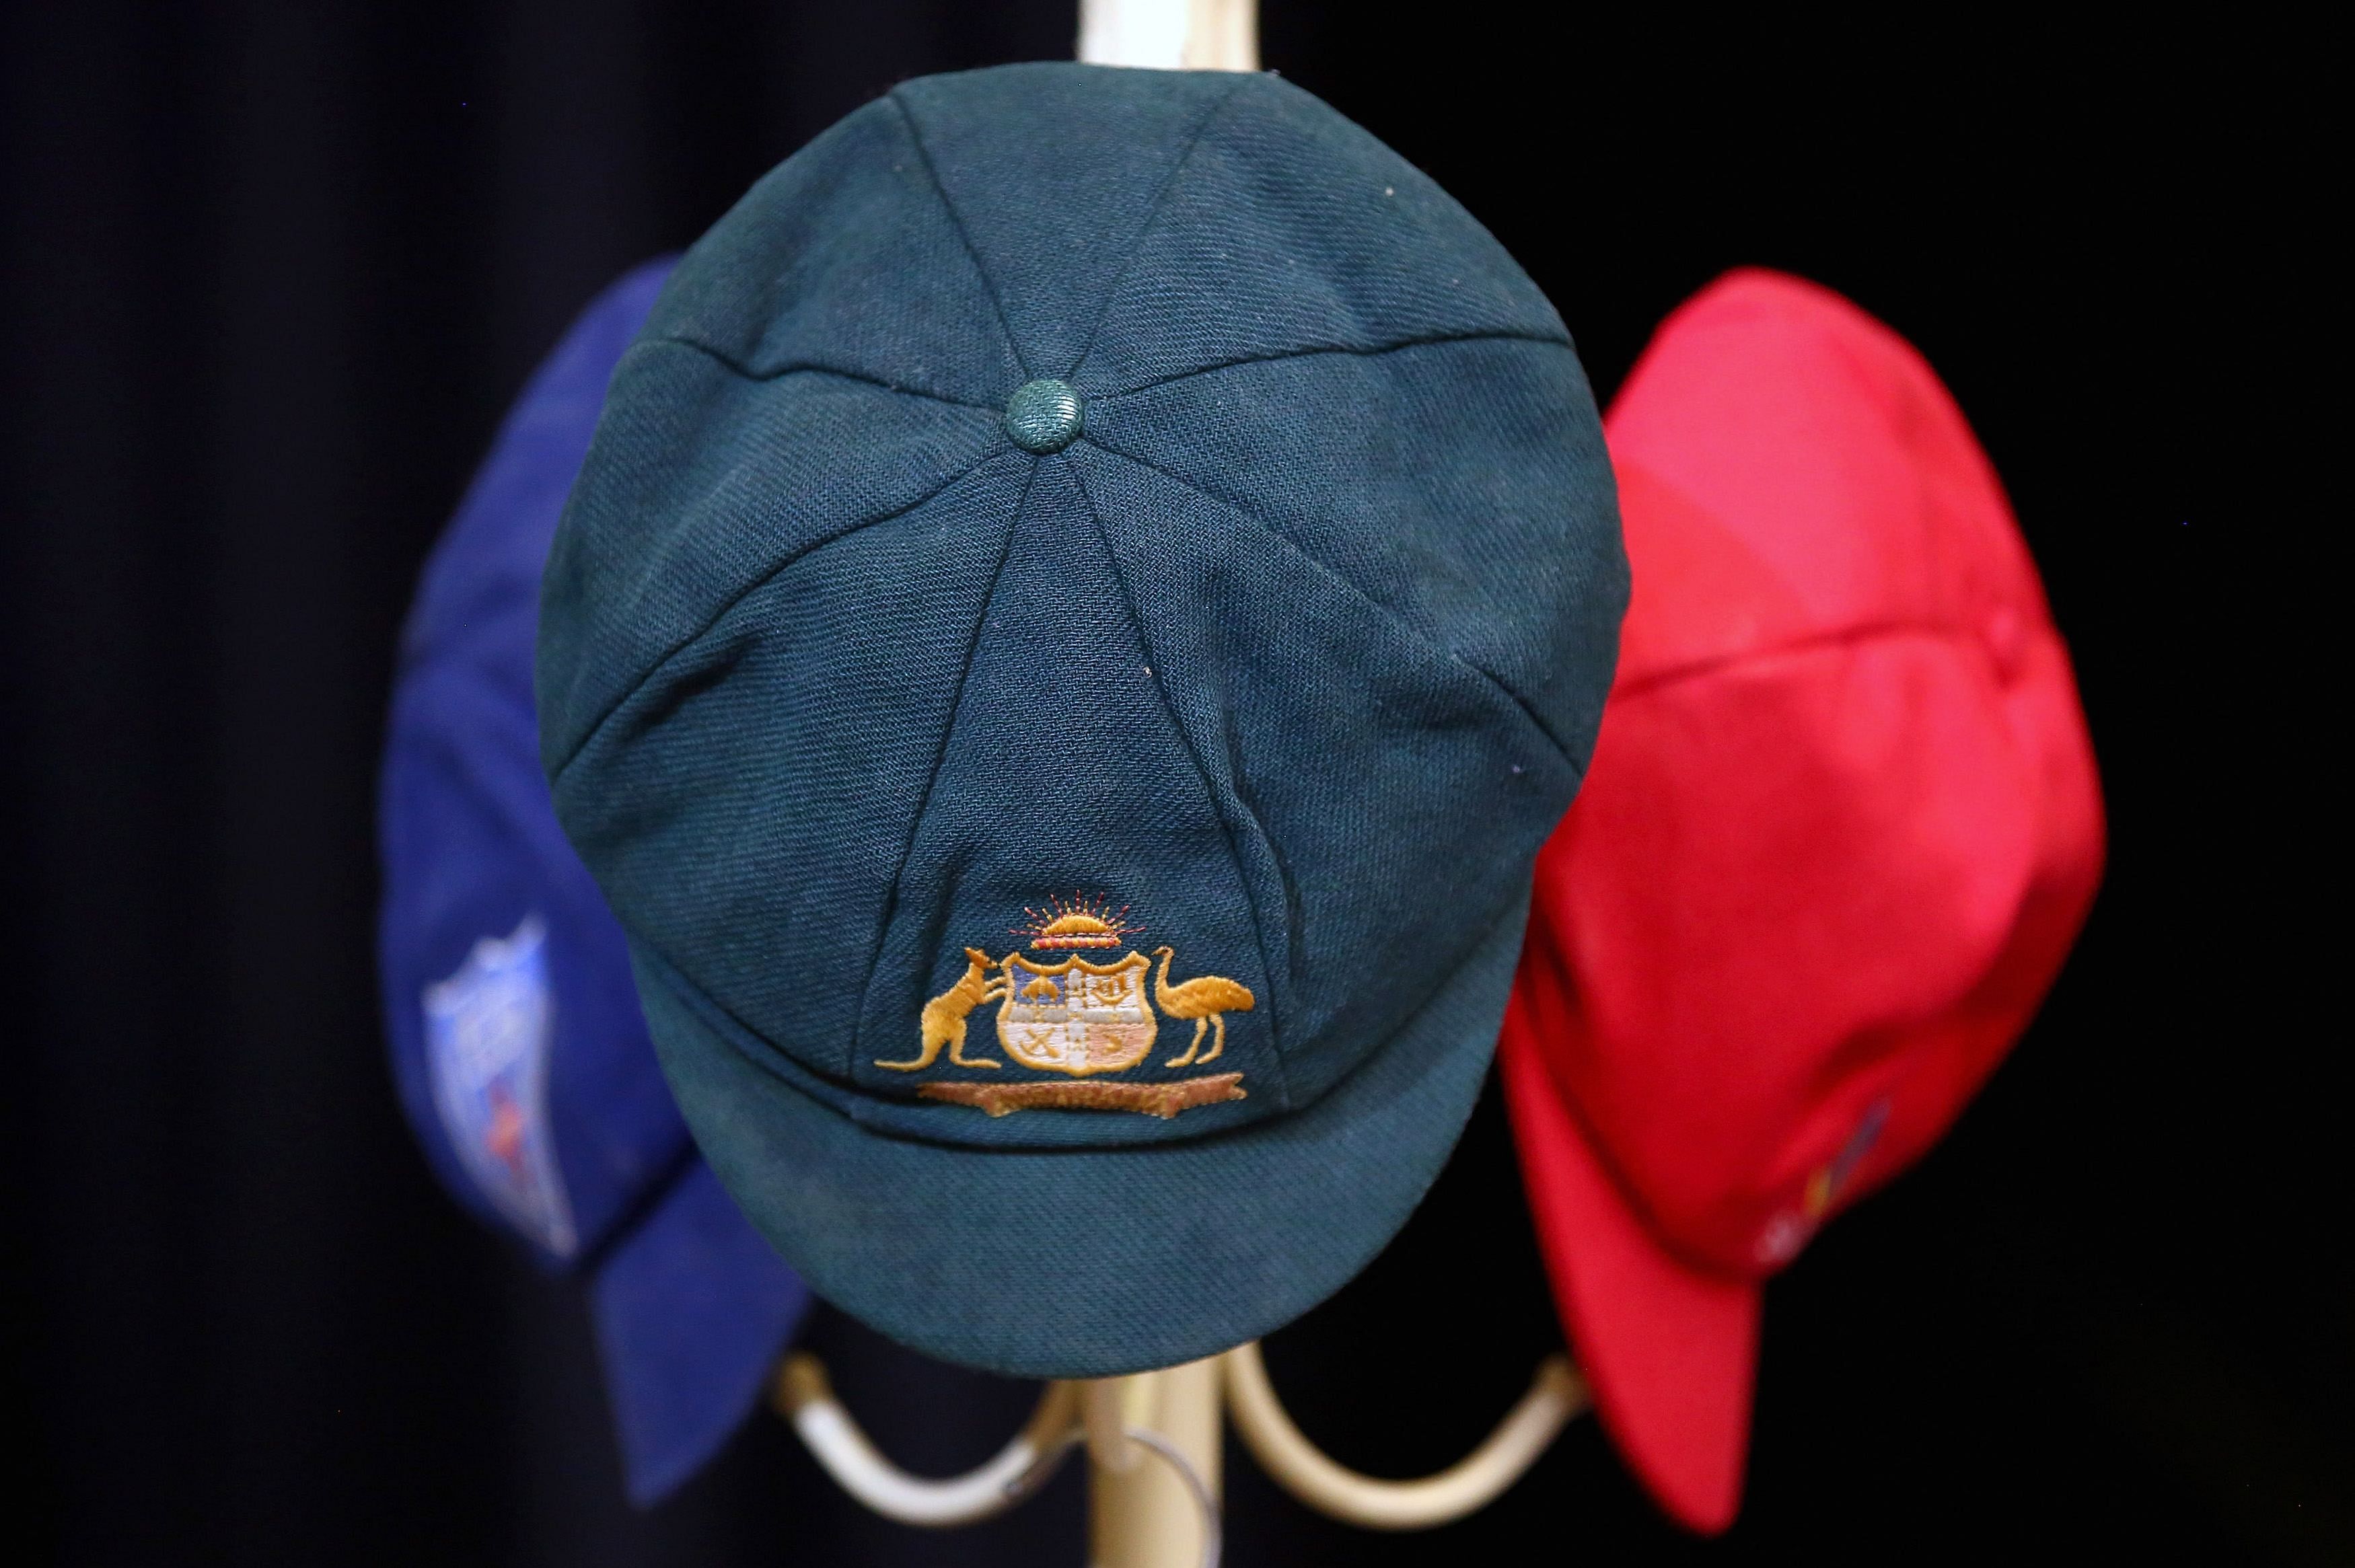 The Baggy Green and other state representative caps belonging to Australian cricketer Phillip Hughes hang near his casket before the start of his funeral service in the town of Macksville, located north of Sydney, December 3, 2014. Photo: Reuters